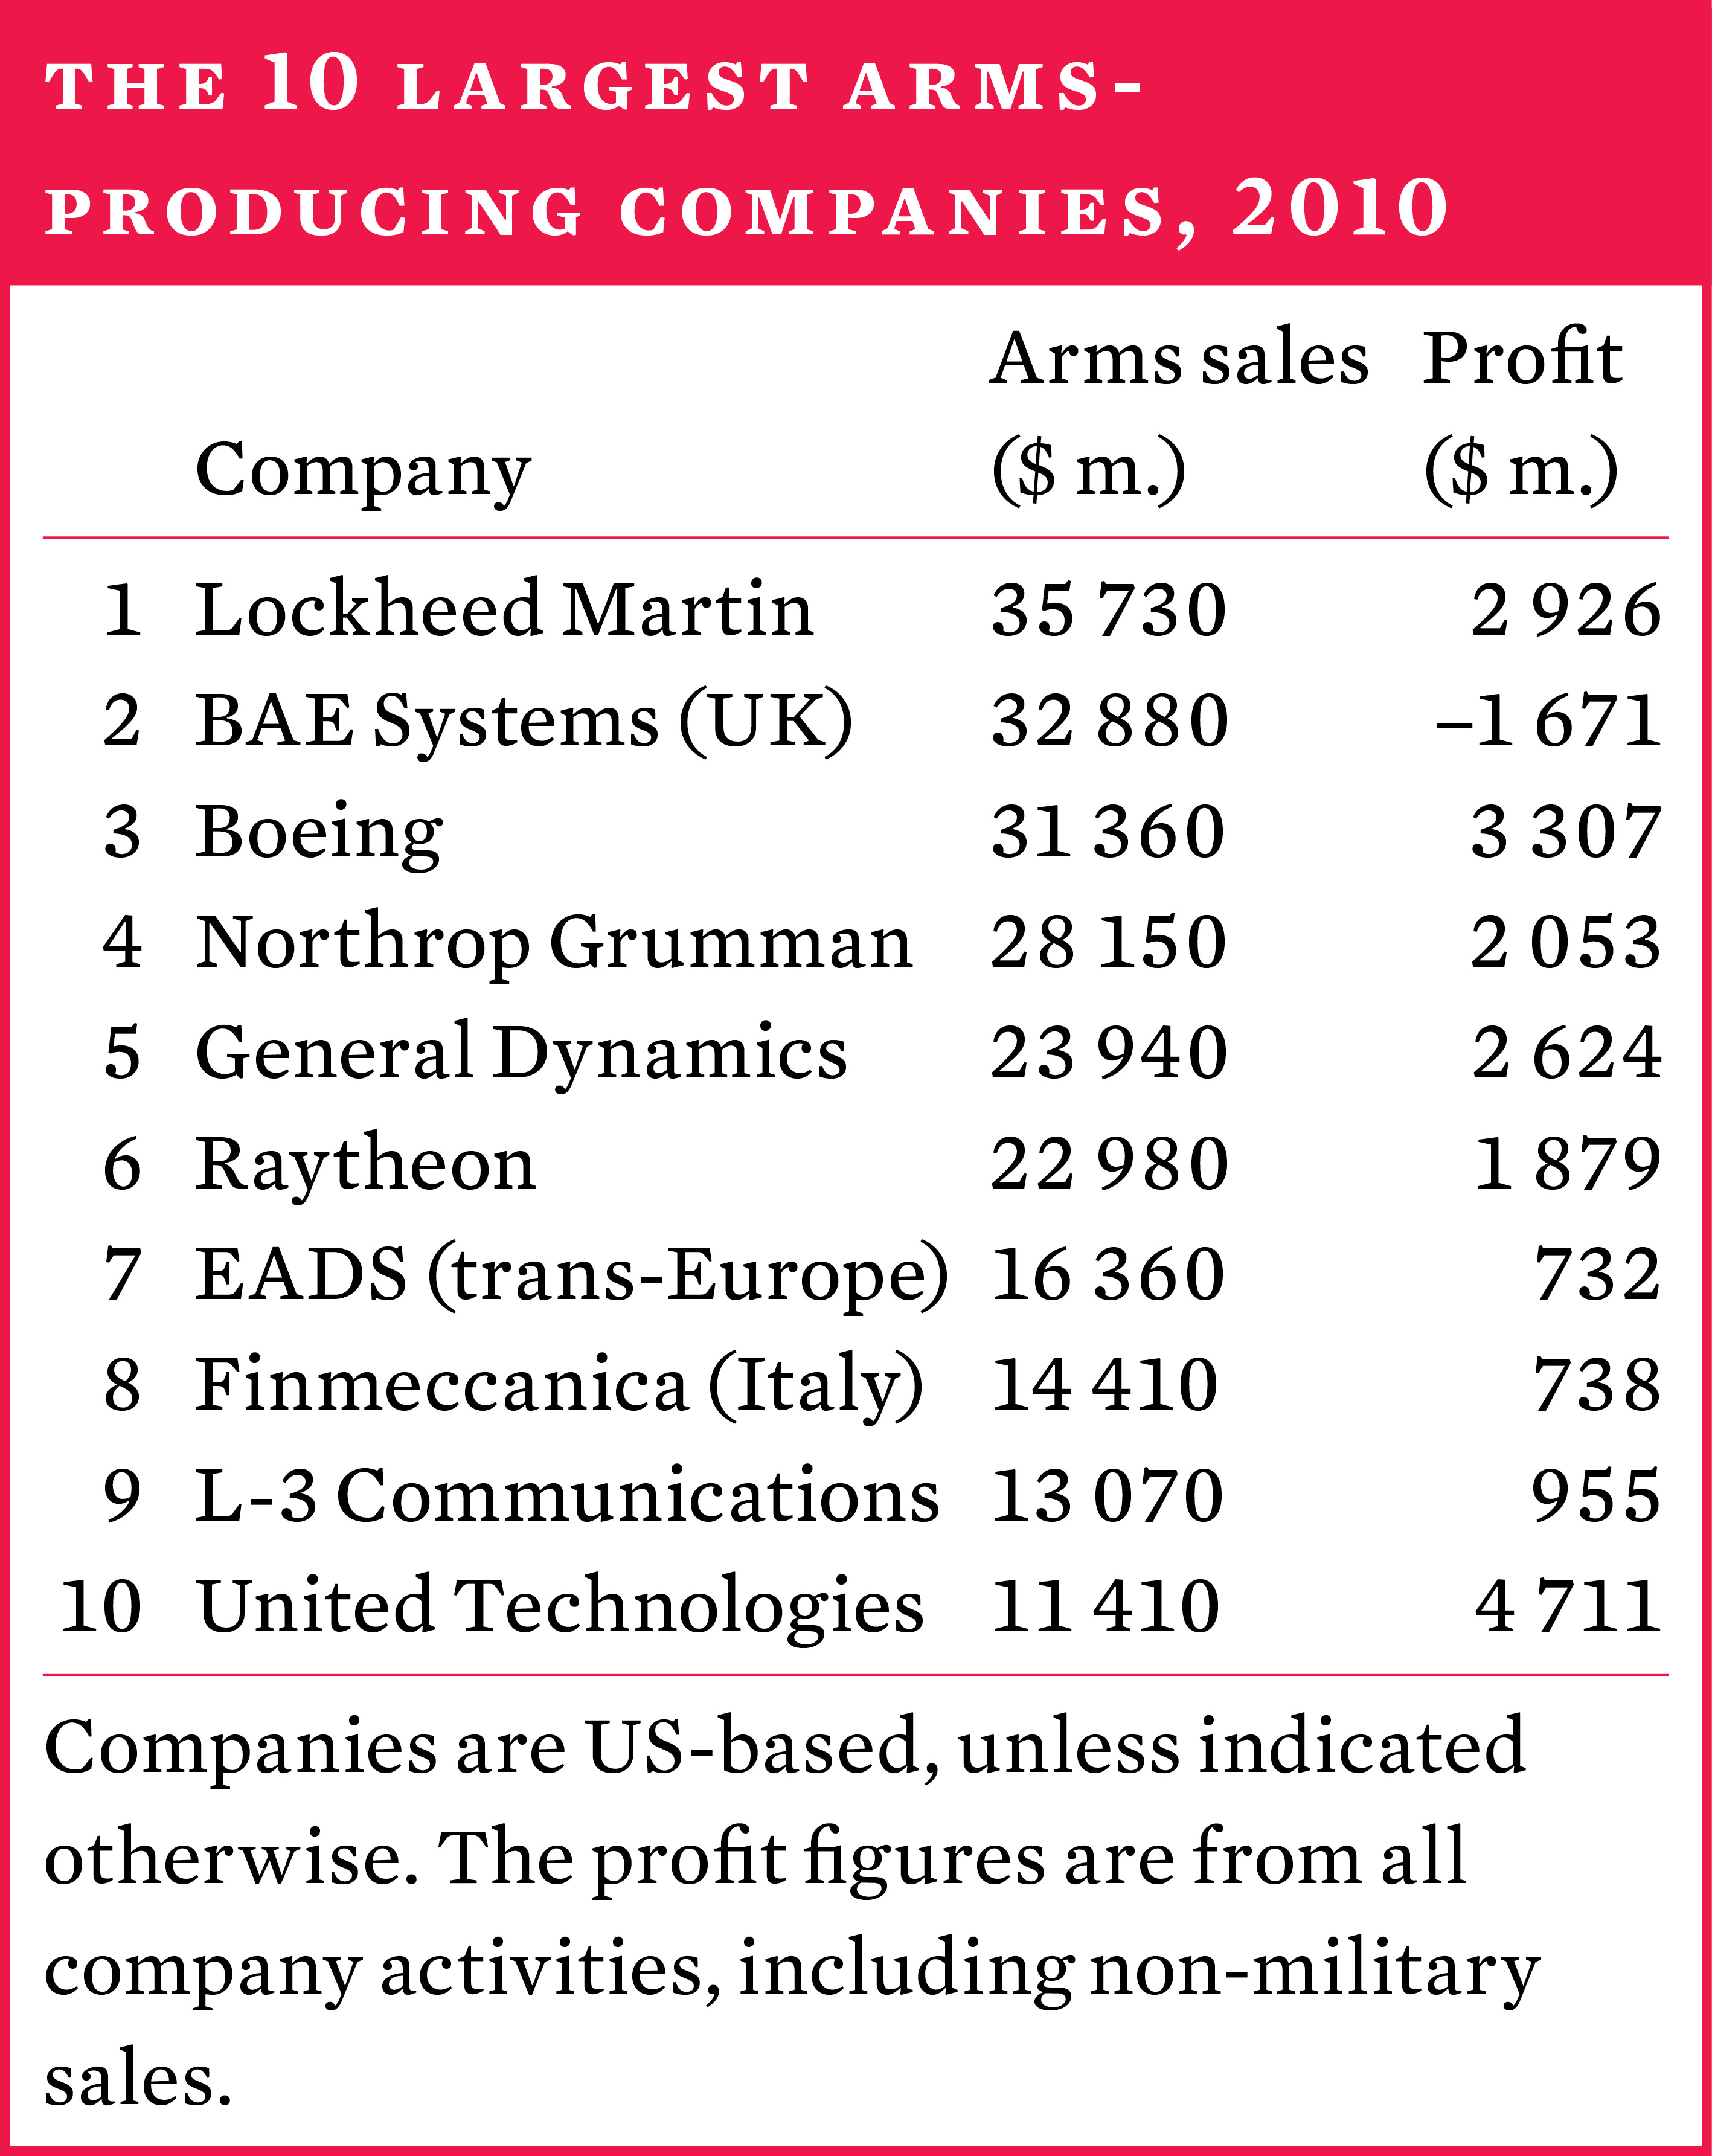 The 10 largest arms-producing companies, 2010